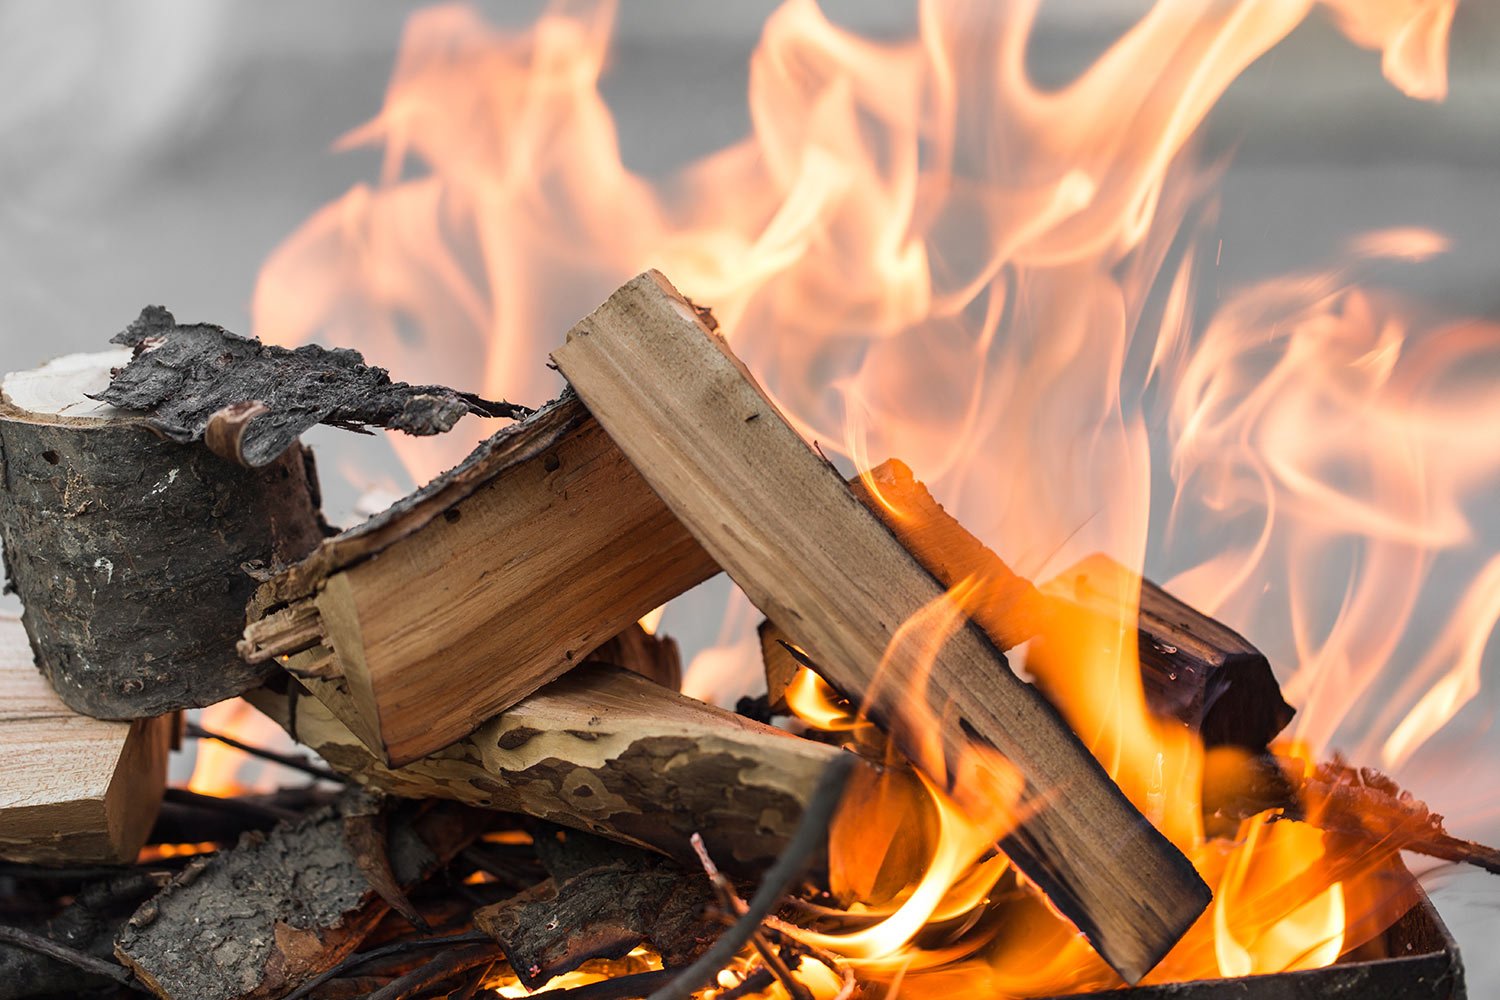 Pollutionwatch: wood fires are bad for planet, more evidence shows